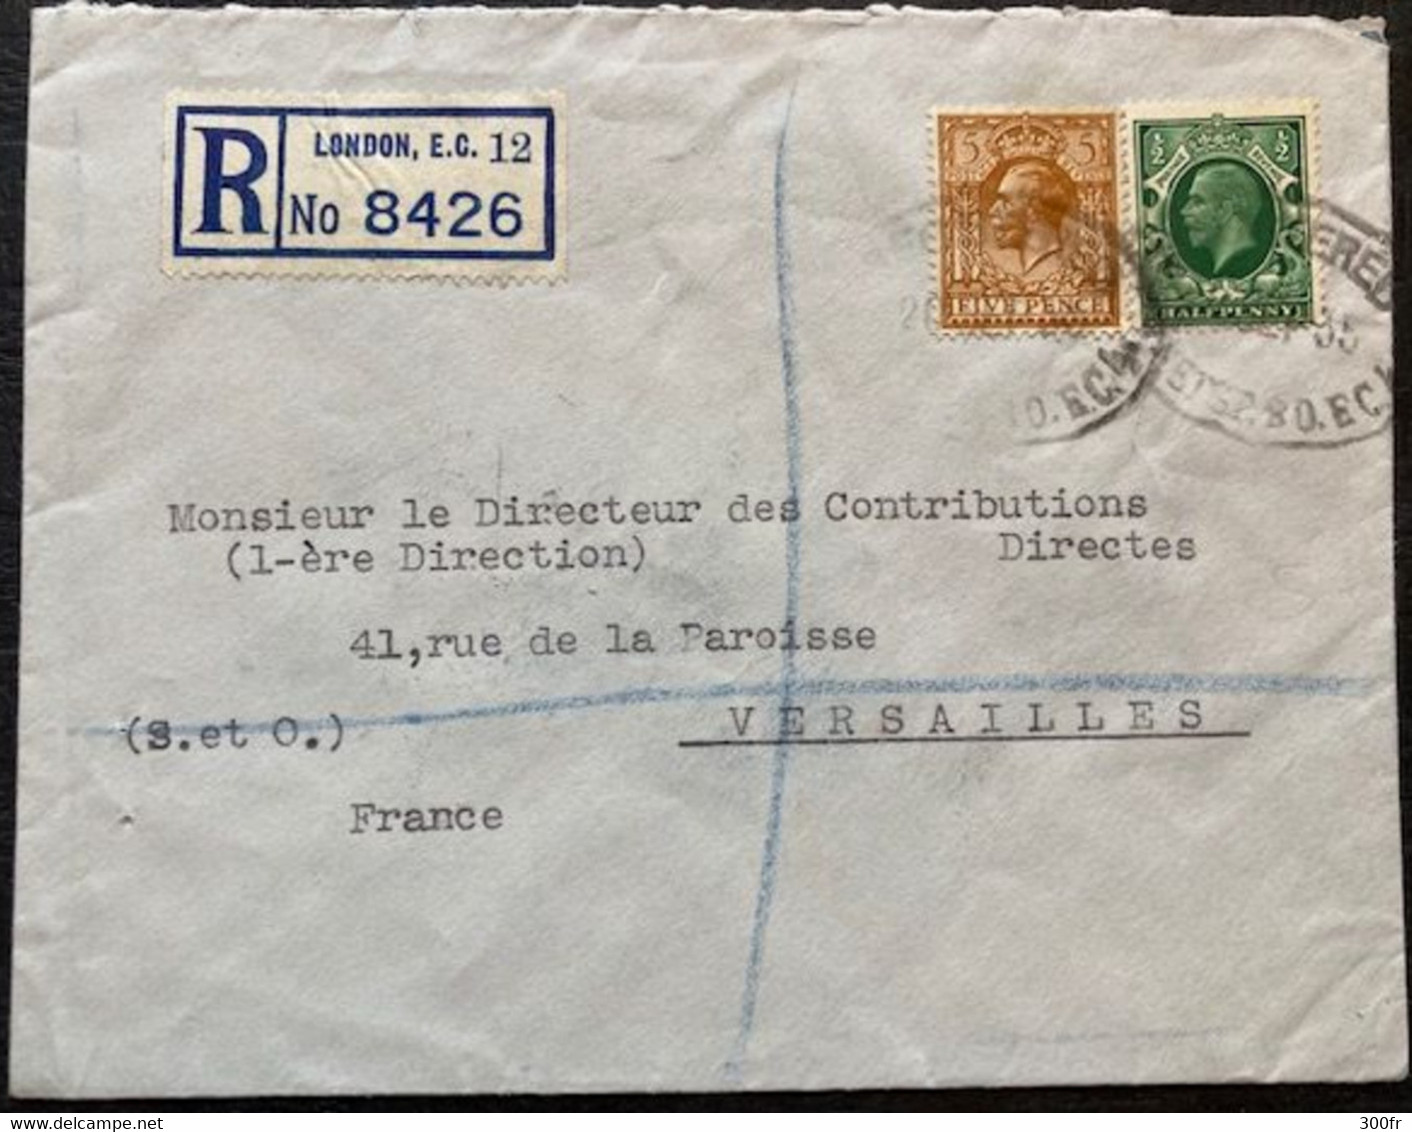 1935 LETTRE RECOMMANDEE REGISTERED COVER LONDON TO VERSAILLES FRANCE - Unclassified